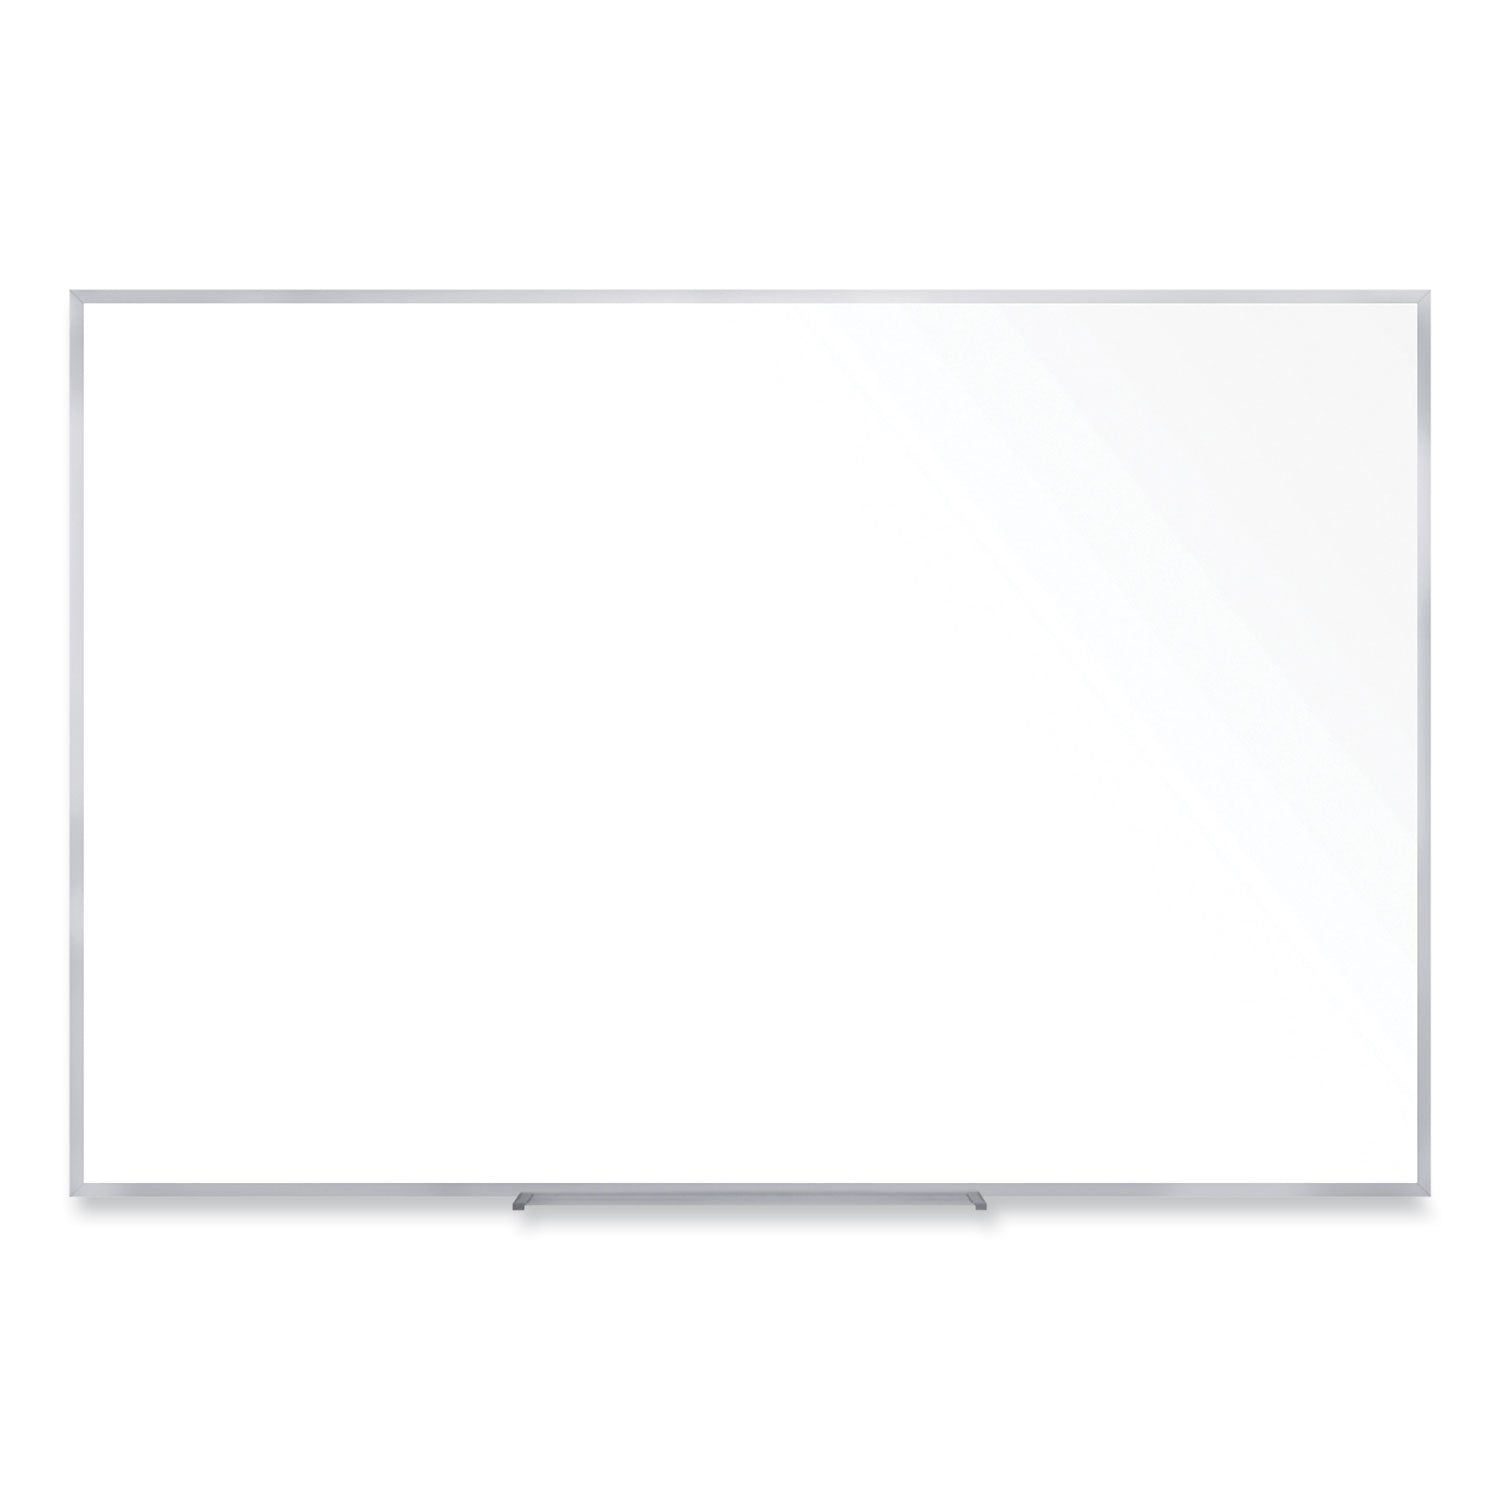 non-magnetic-whiteboard-with-aluminum-frame-6063-x-3644-white-surface-satin-aluminum-frame-ships-in-7-10-business-days_ghem2354 - 1